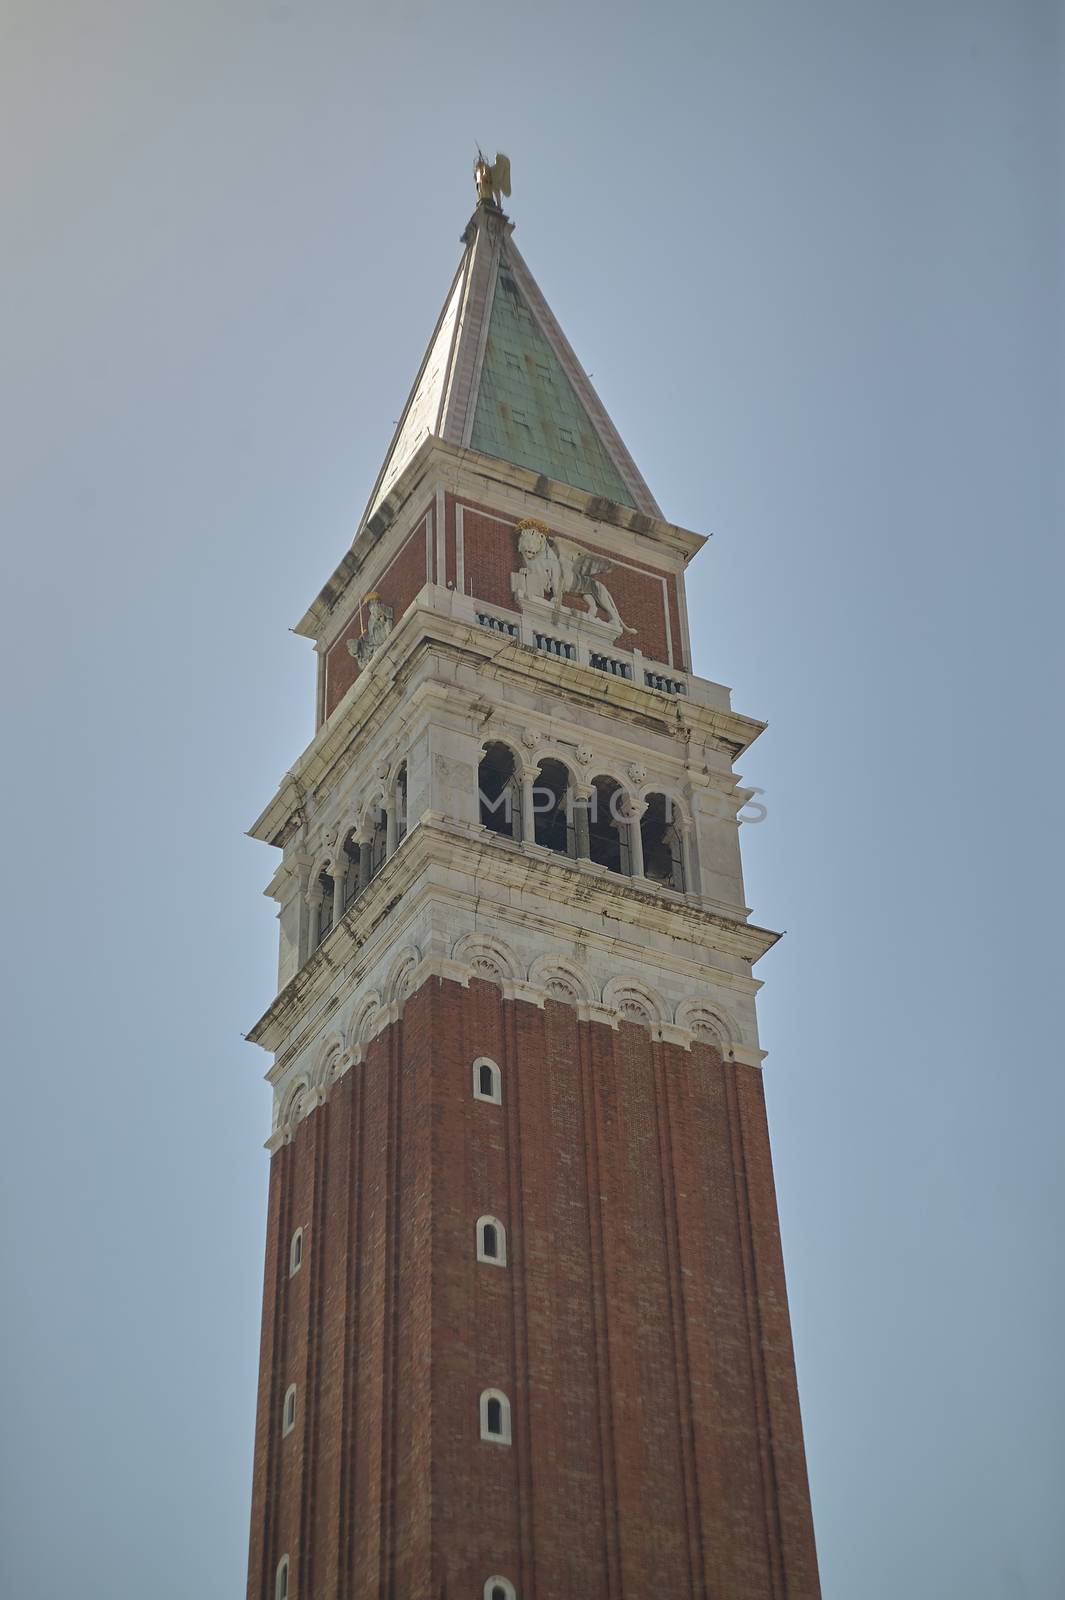 Top of the bell tower of St. Mark's Church in Venice with blue sky background